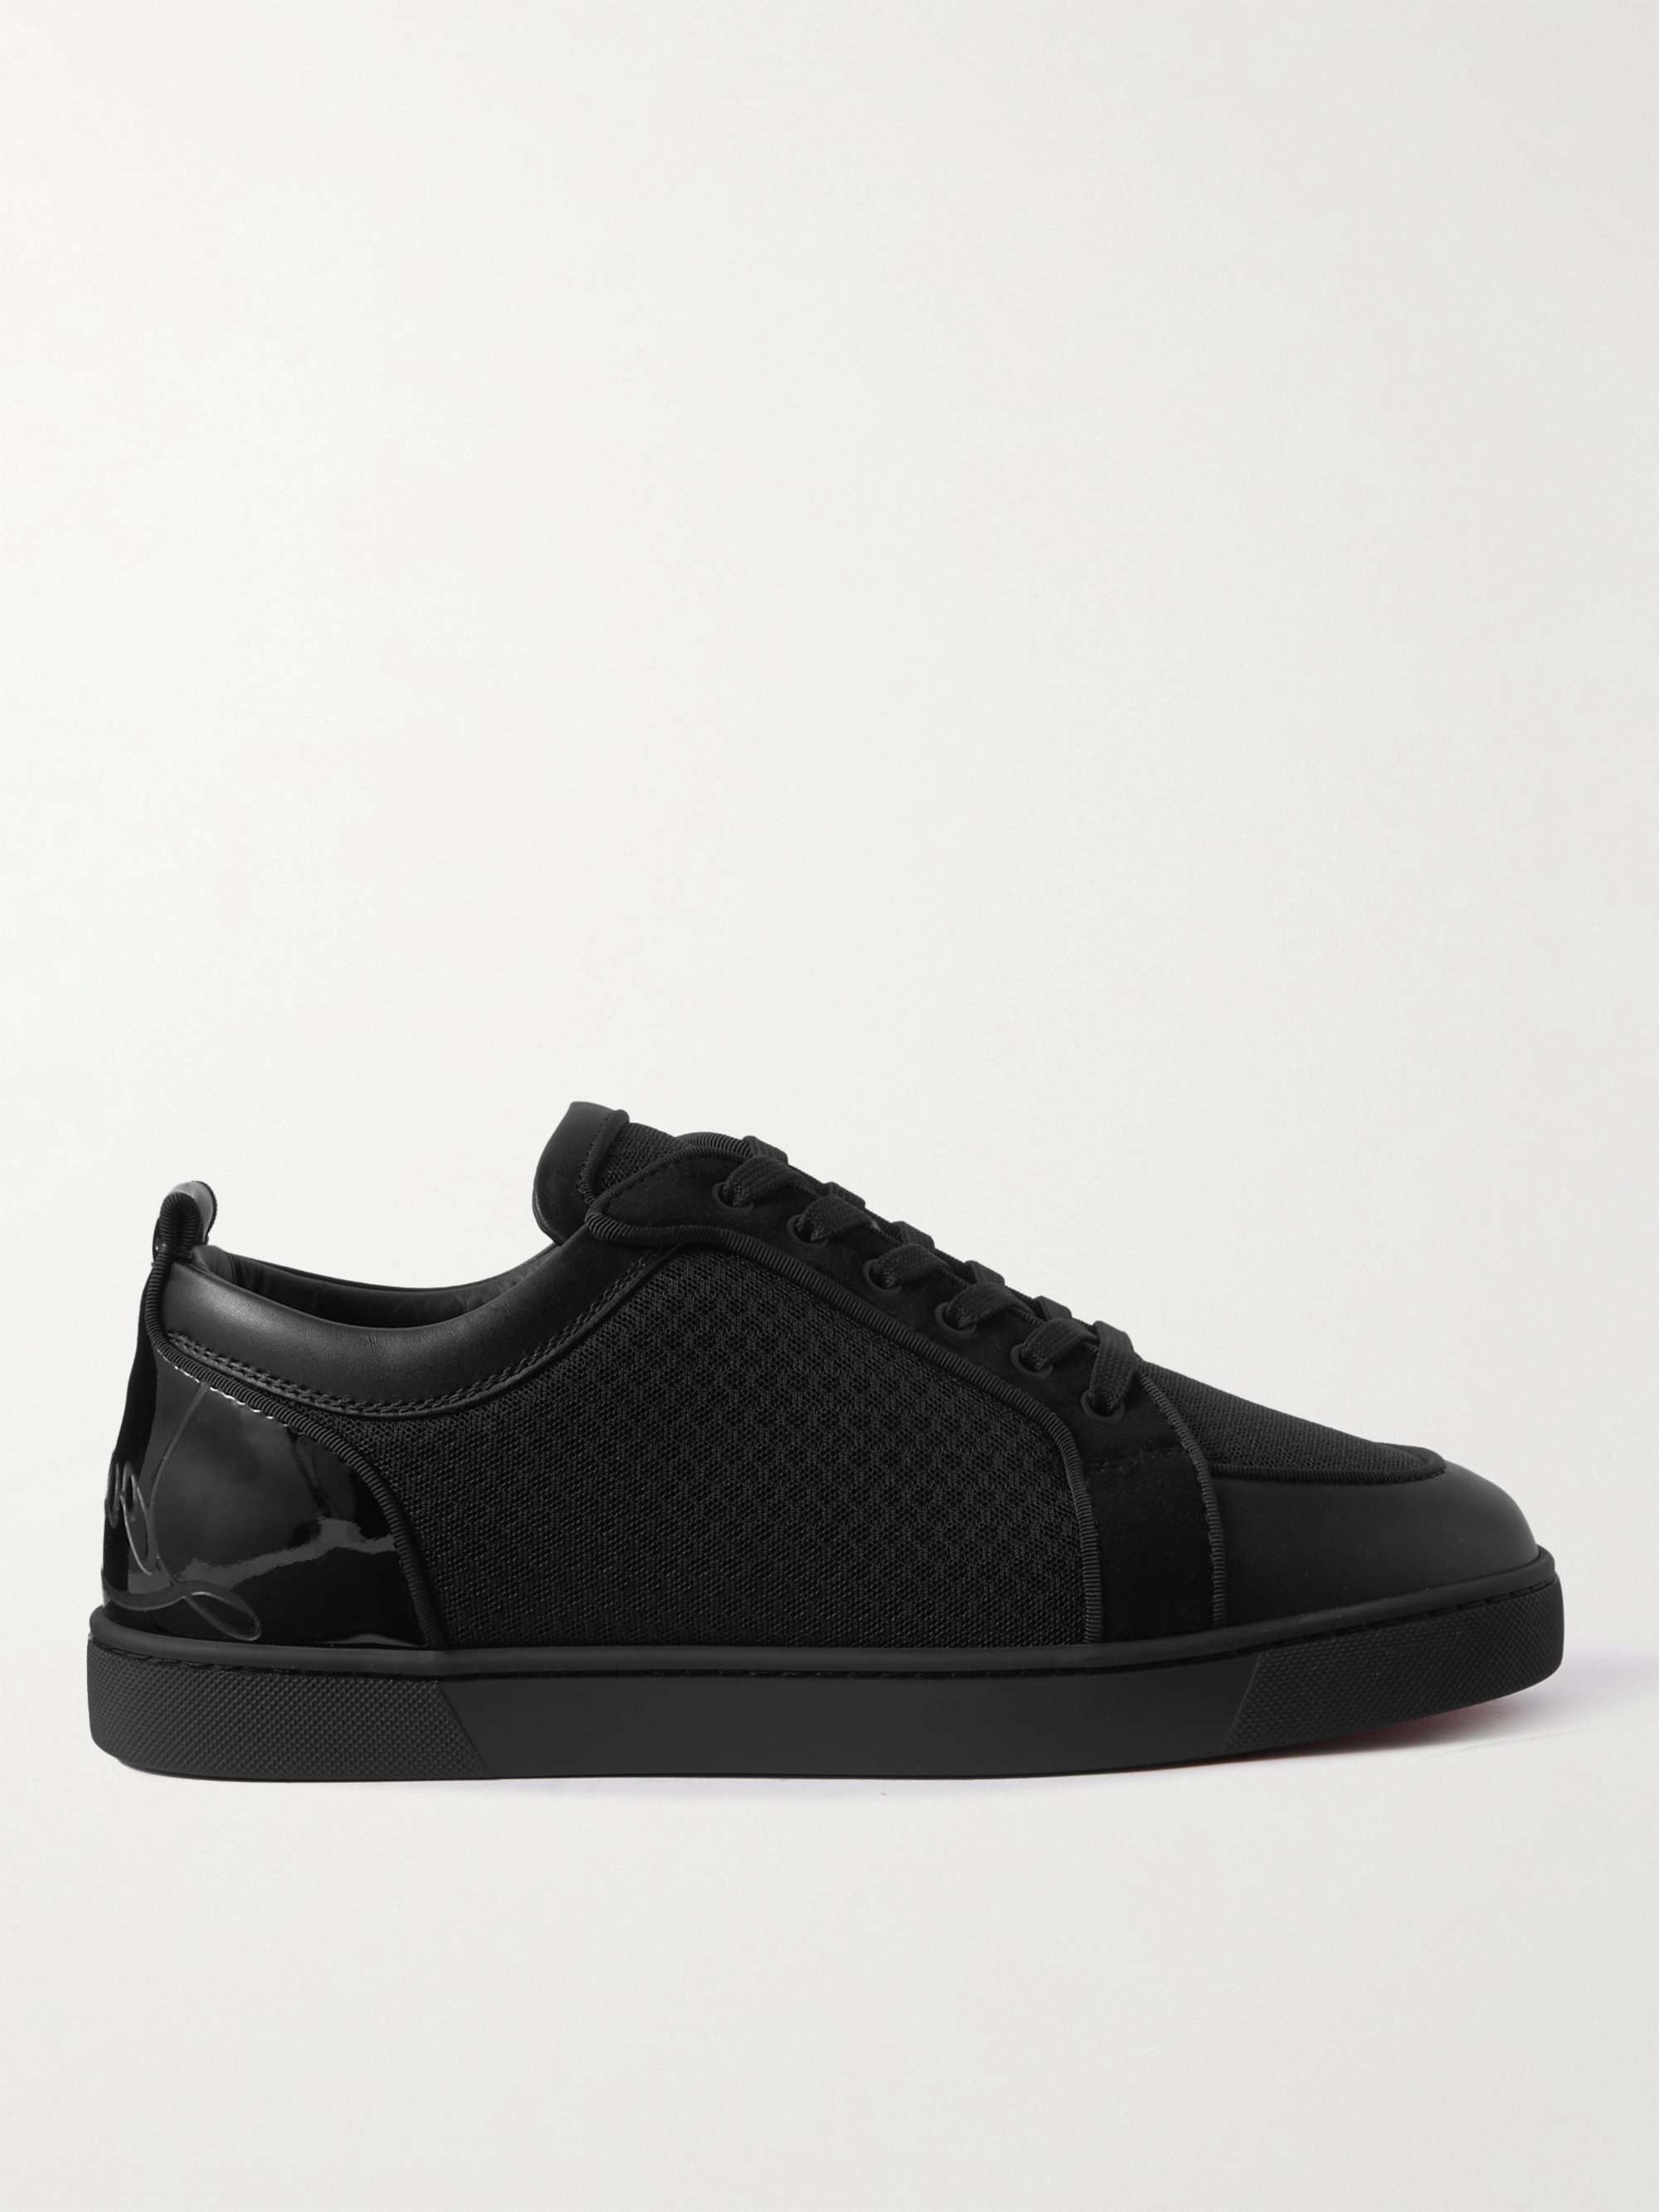 Christian Louboutin Suede-Trimmed Leather and Mesh Sneakers - Men - Black Suede Shoes - EU 42